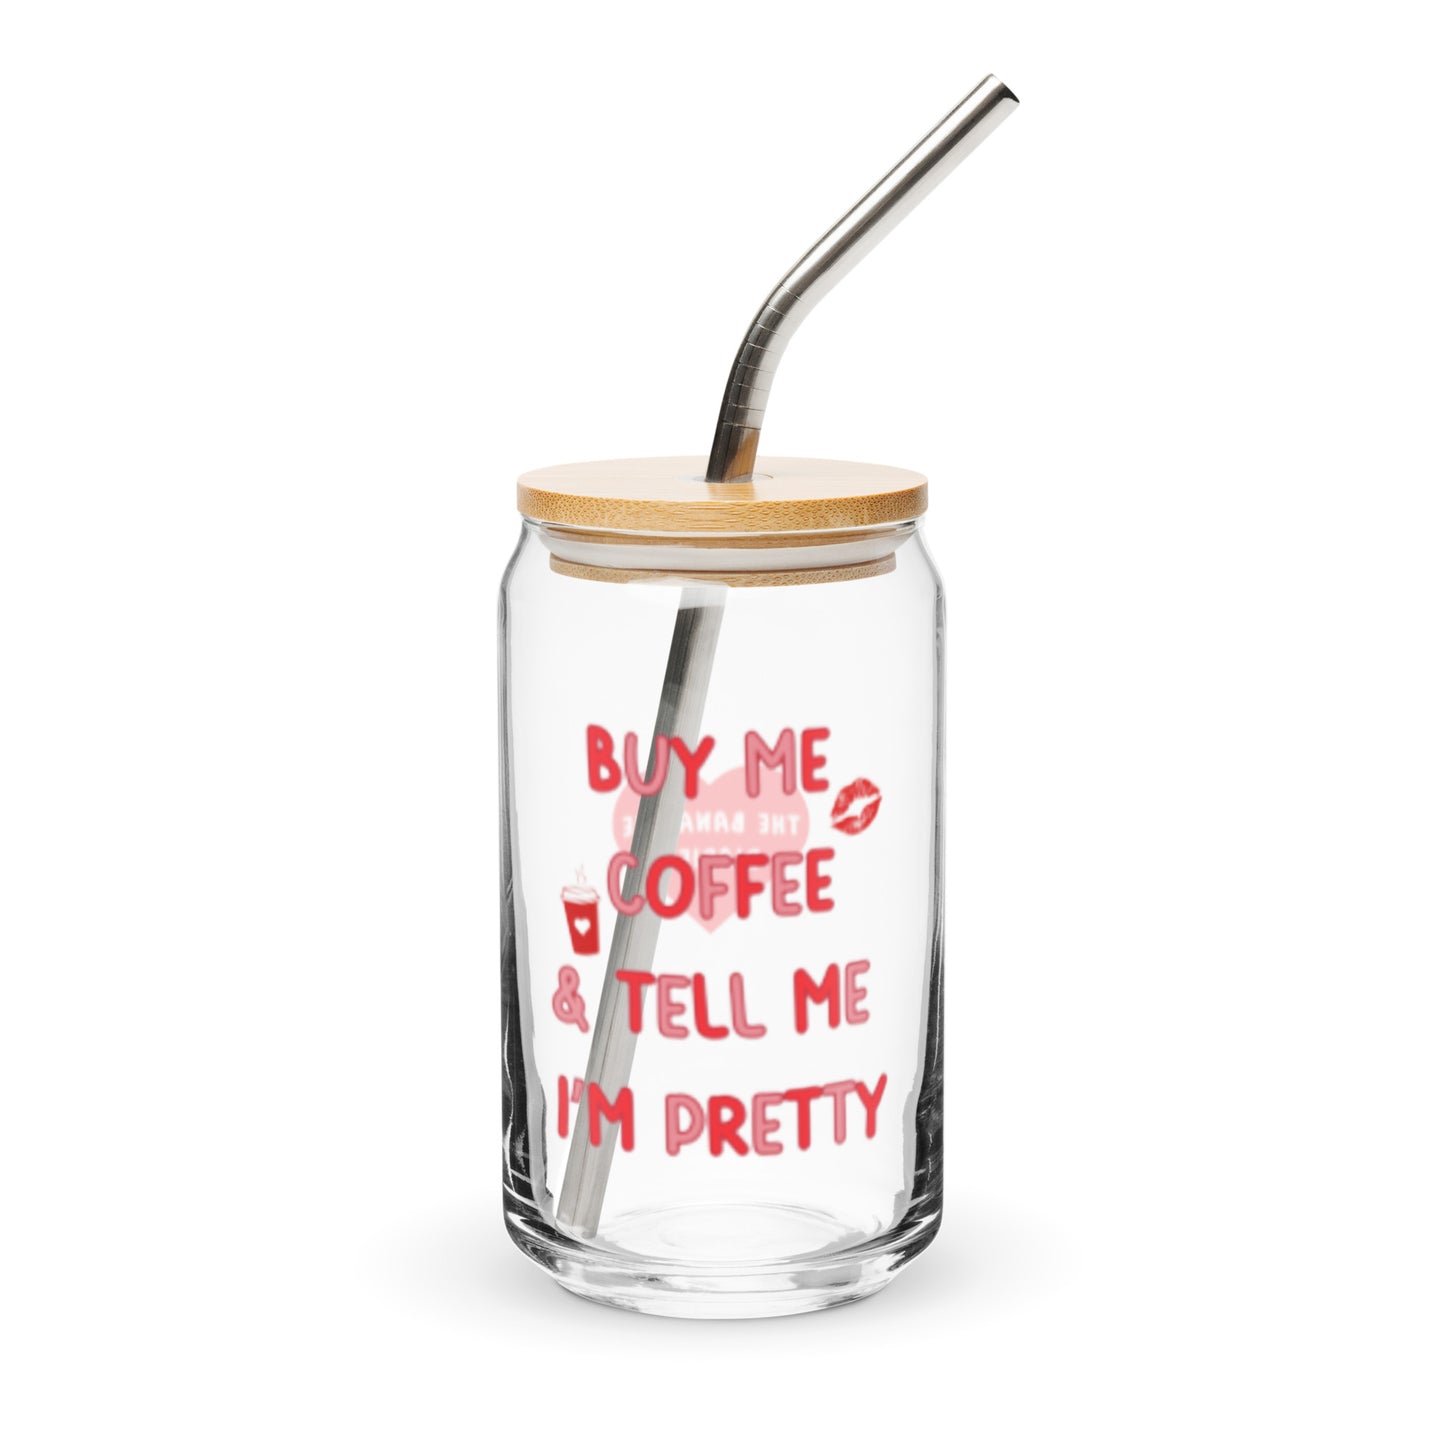 Buy Me Coffee and Tell Me I'm Pretty - Can-Shaped Glass,  by The Banannie Diaries - Volume: 16 oz. (473 ml), Glassware, Houseware